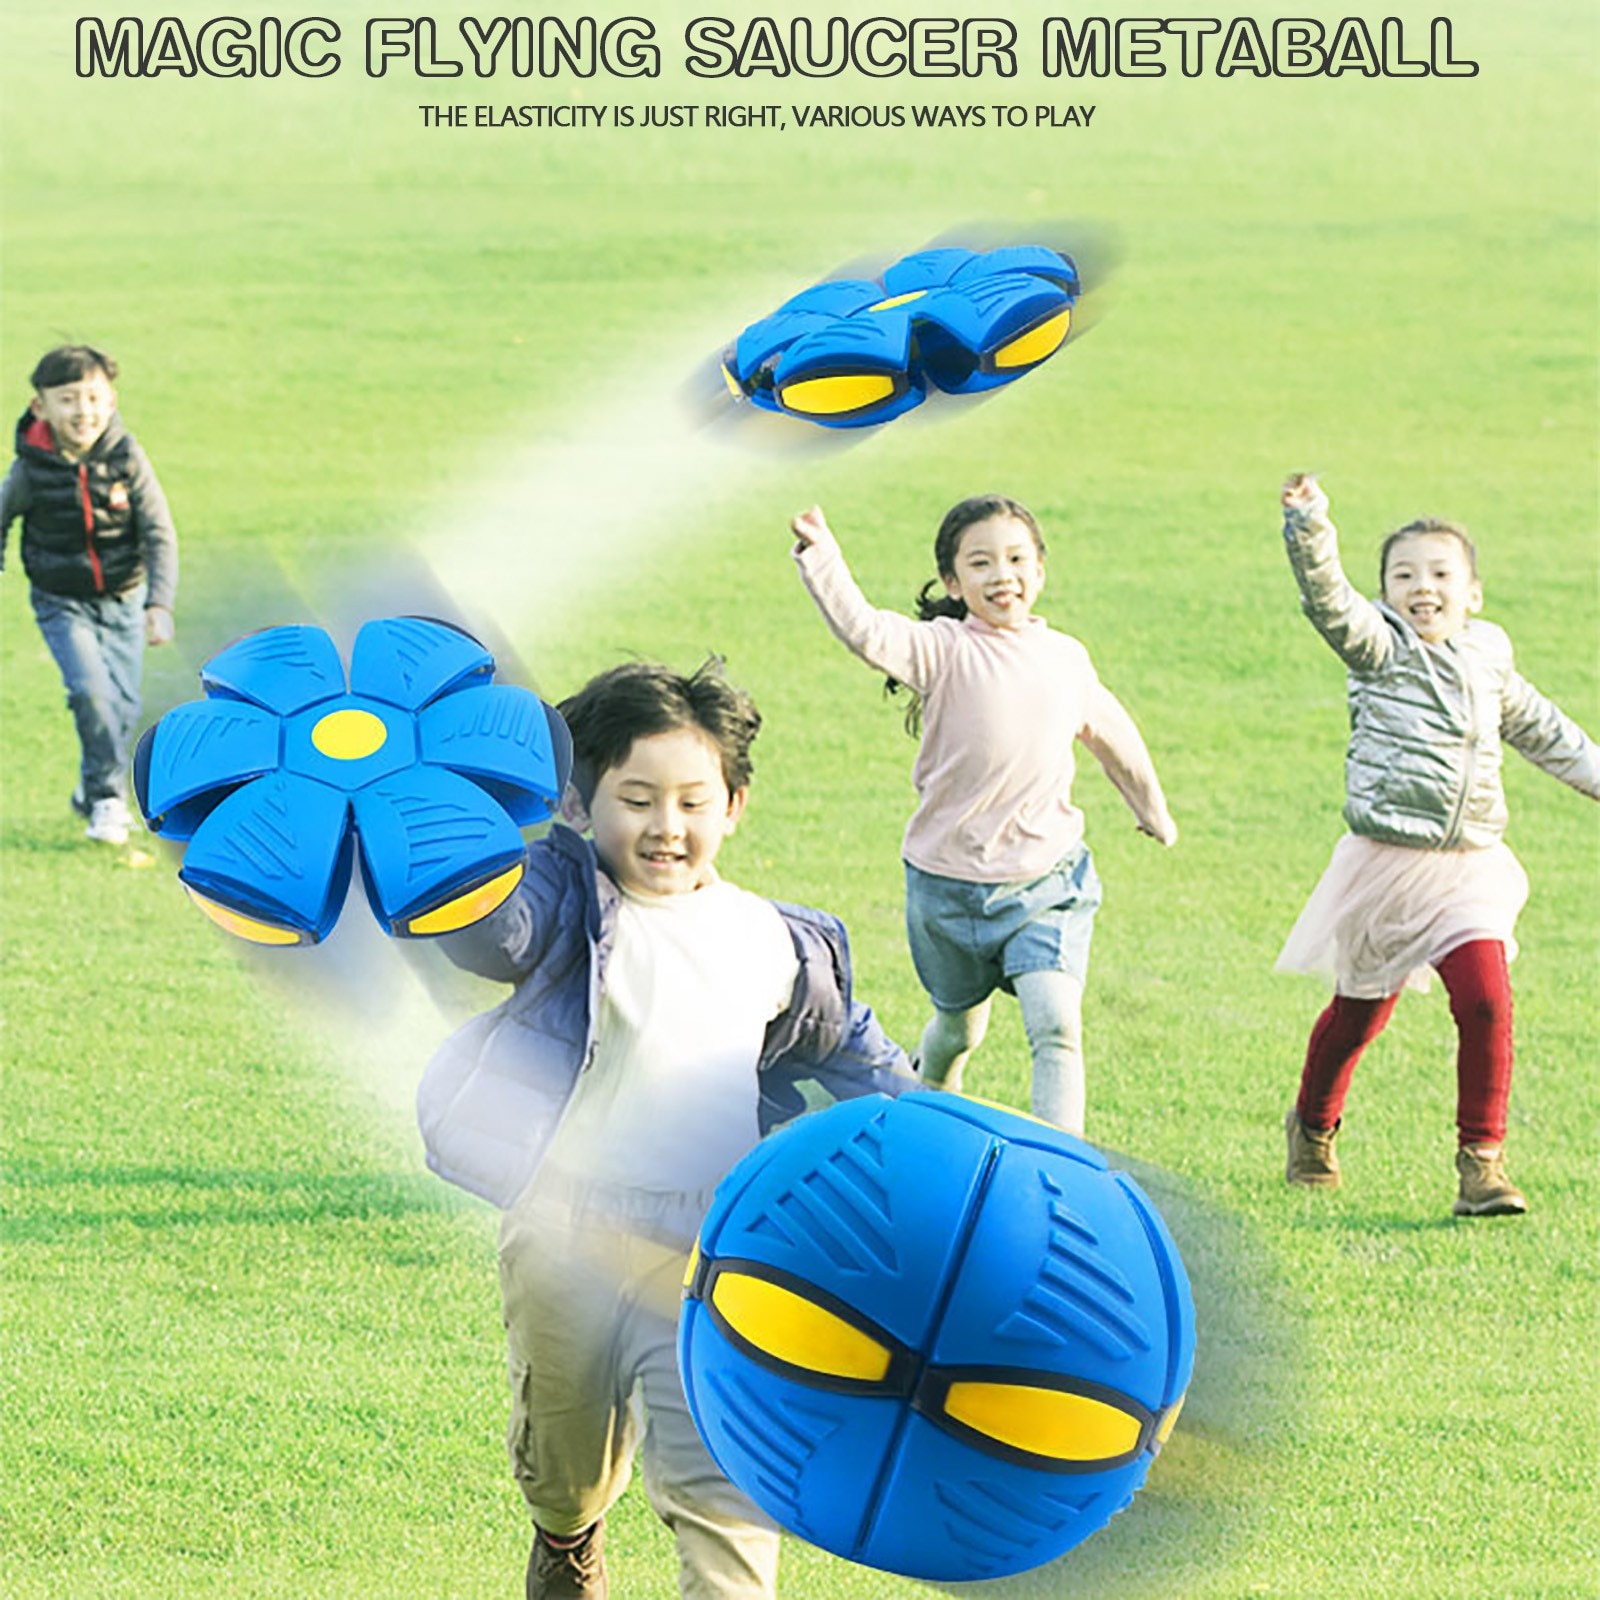 Children's Toy Ball Decompression Deformed Flying Saucer Ball Magic Stretch Exhaust Deforms The Decompression Flying Saucer Ball